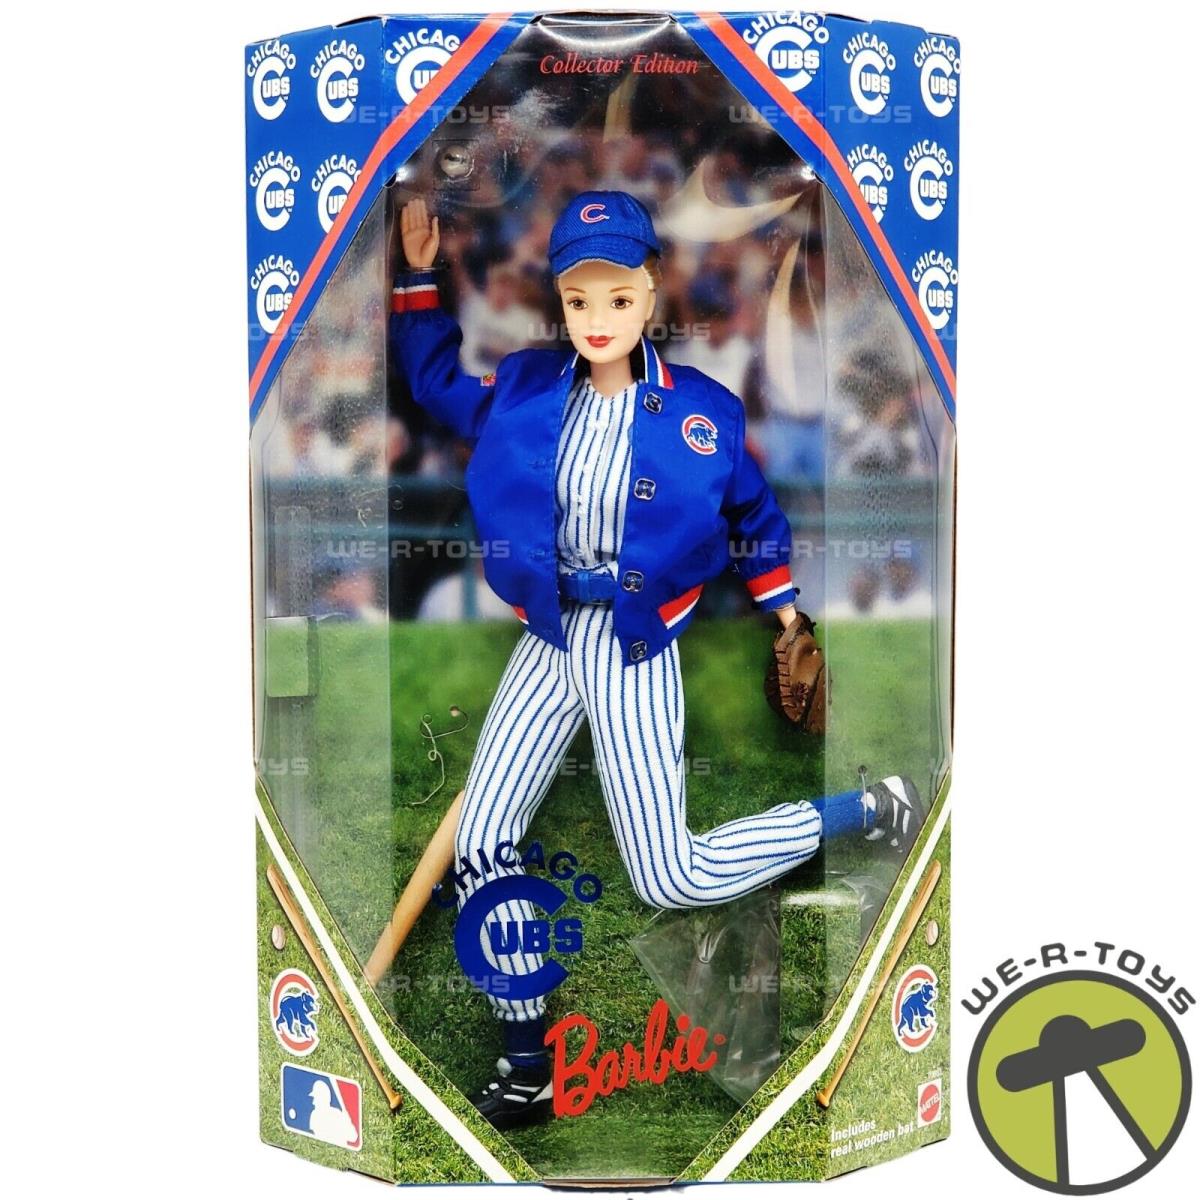 Chicago Cubs Barbie Doll Collector Edition 1999 Mattel 23883 Nrfb